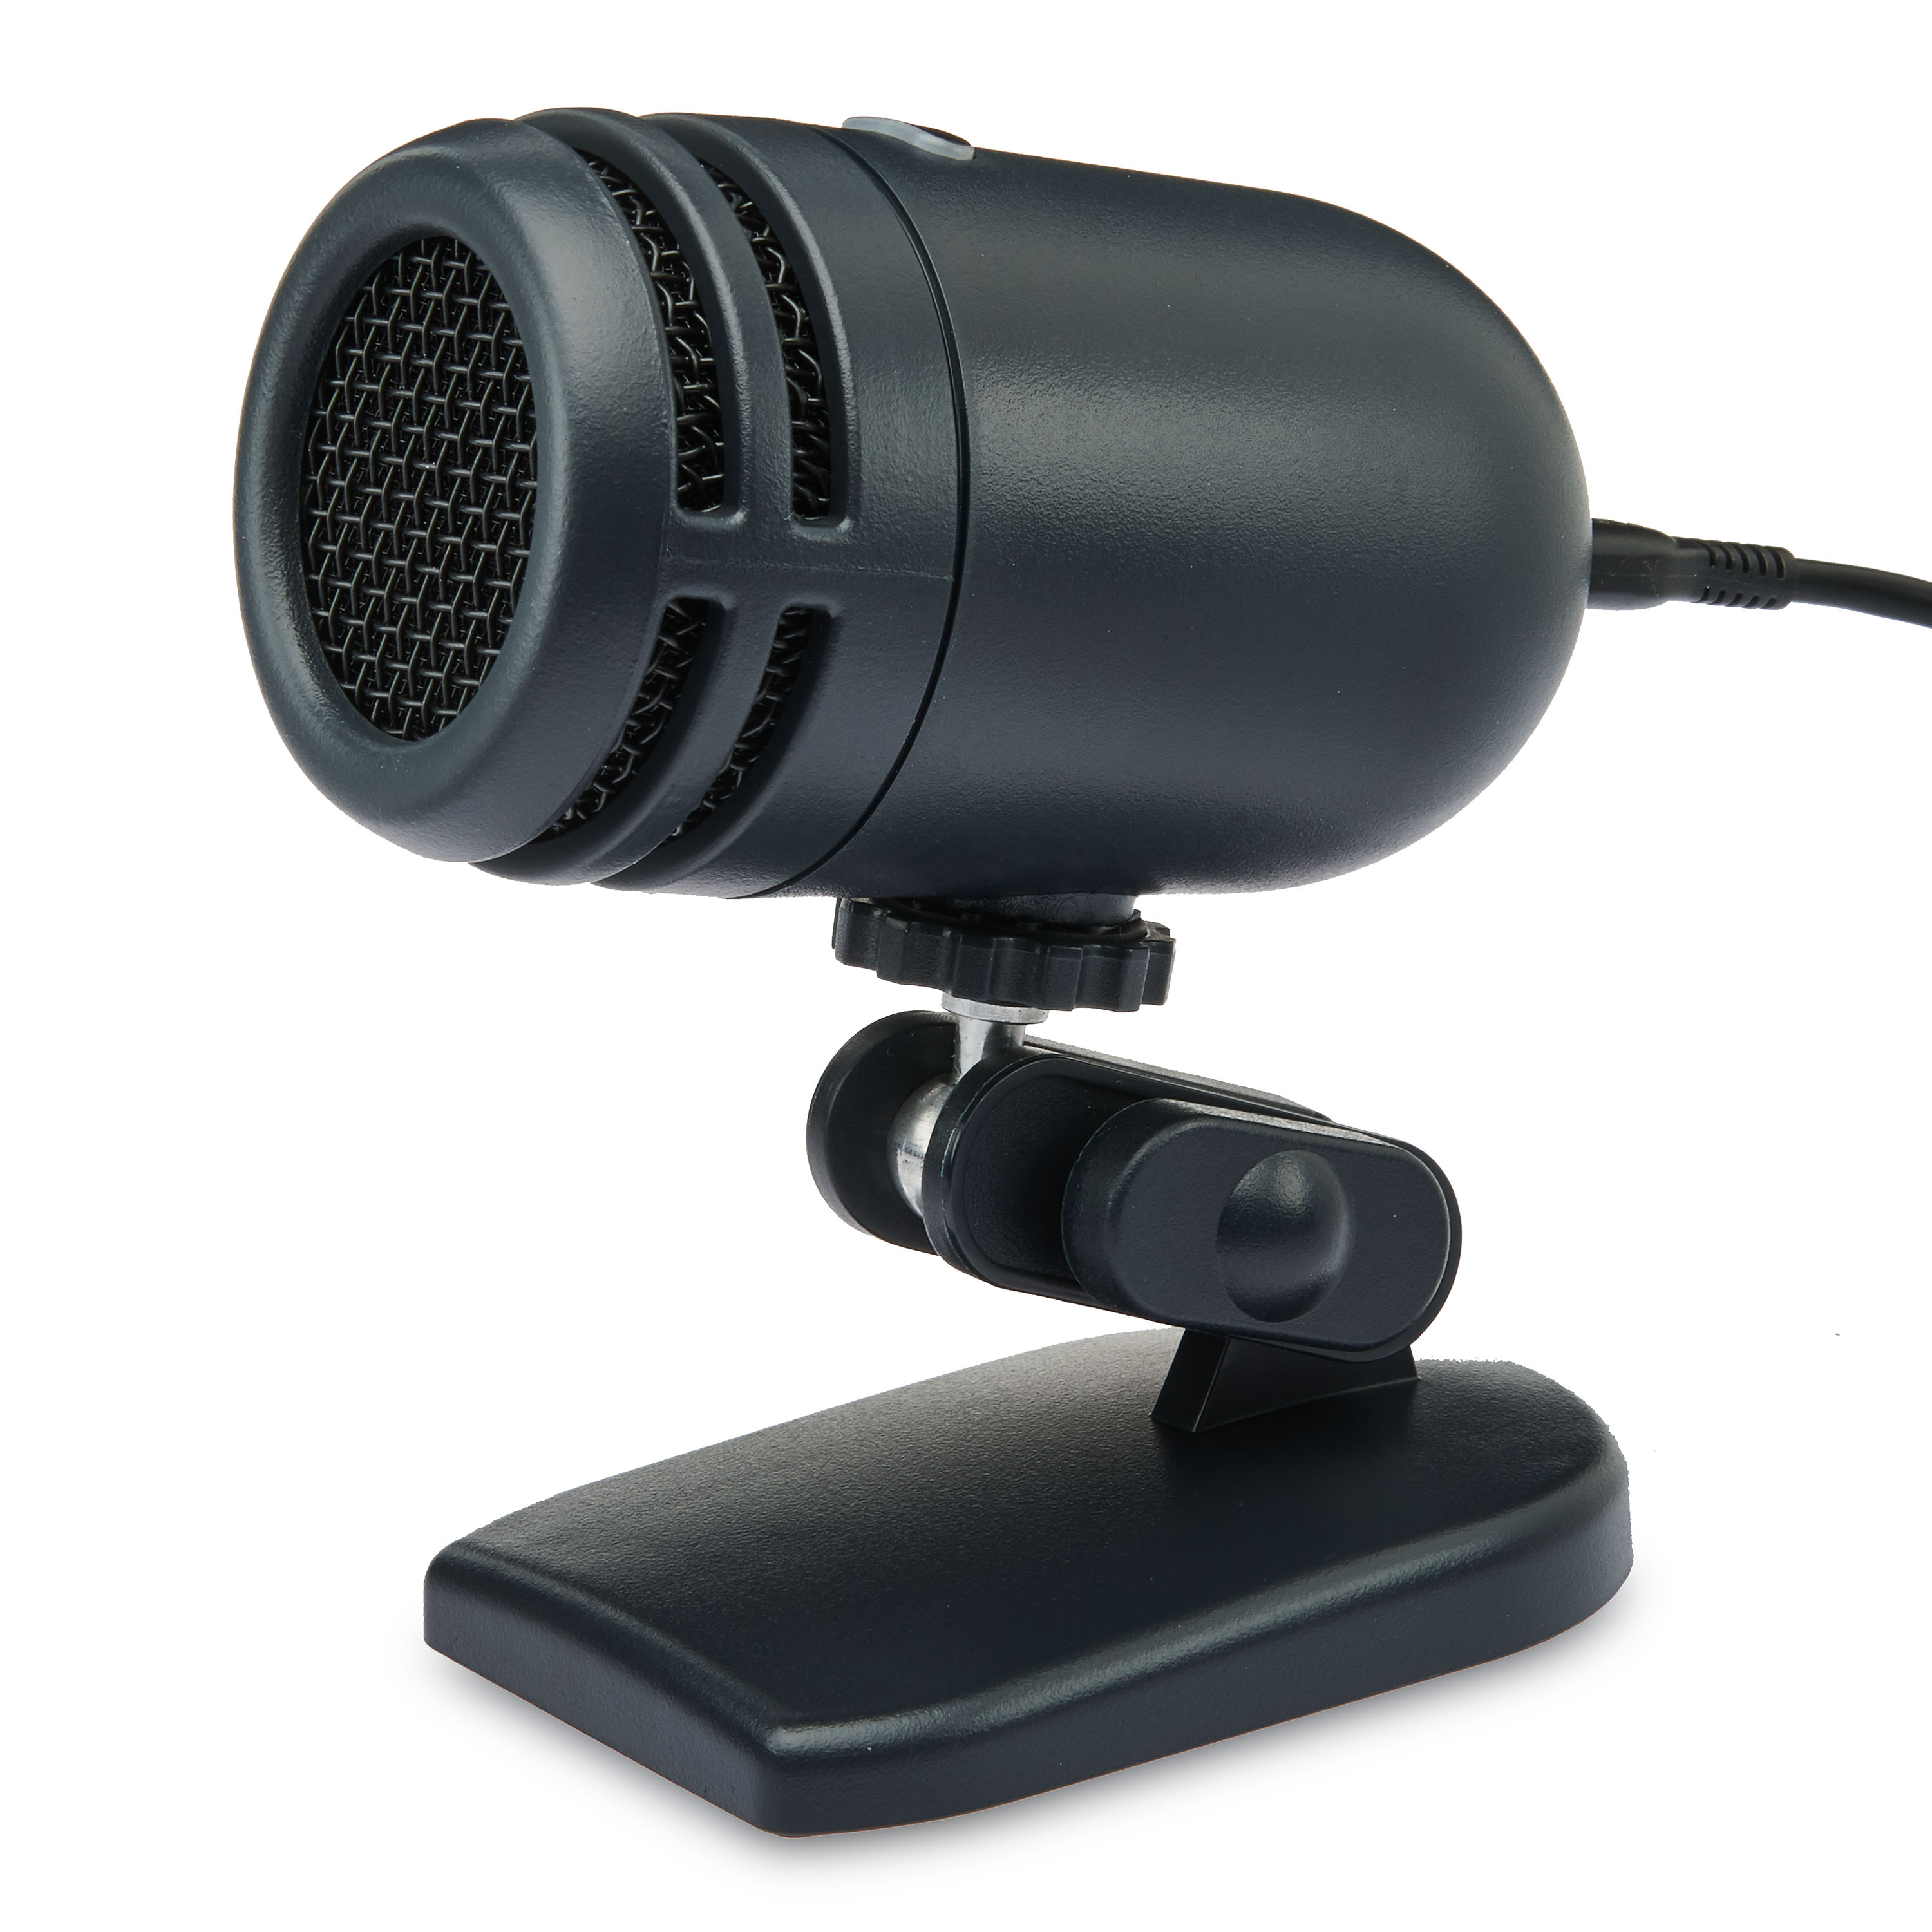 onn. USB Podcast Microphone with Cardioid Recording Pattern - image 1 of 9